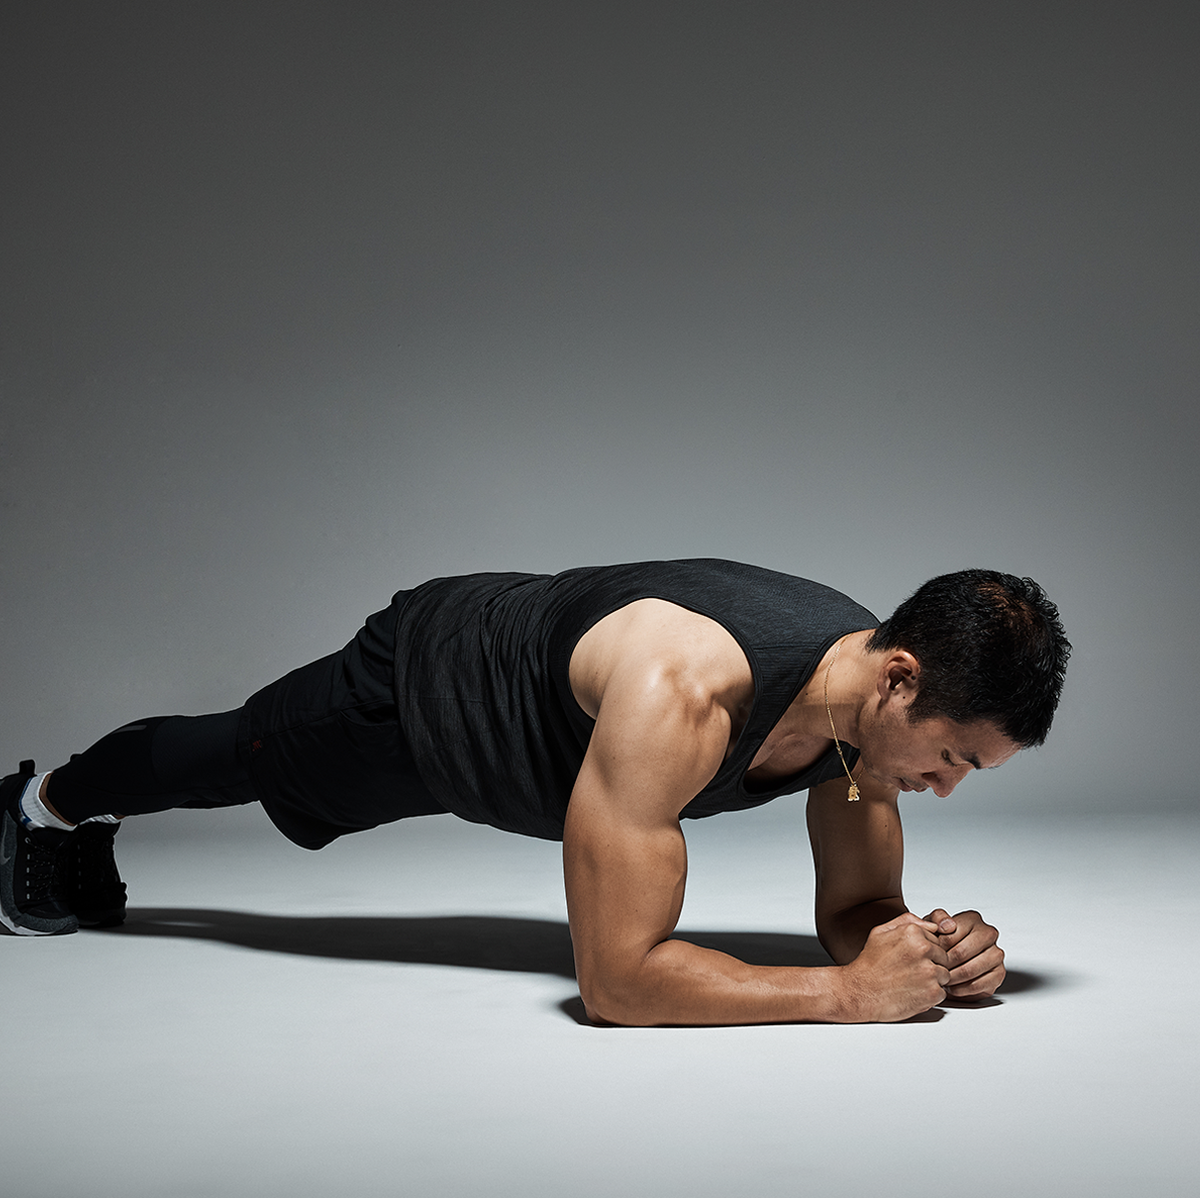 How to Do the Perfect Plank Exercise - Best Abs Workout Moves